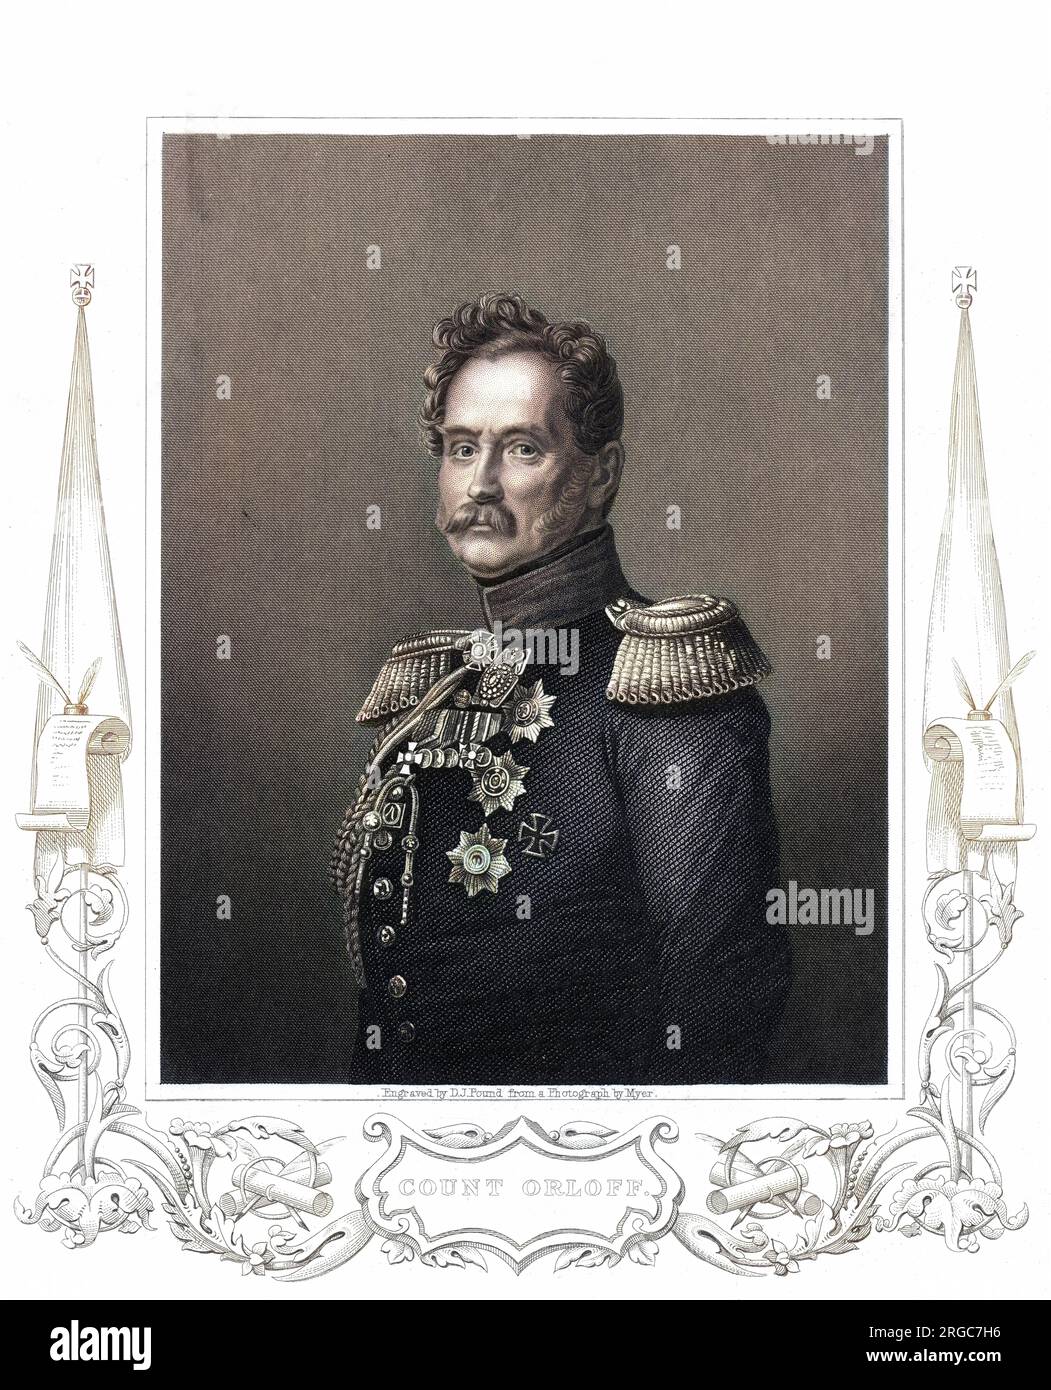 Prince ALEXIS FEODOROVICH ORLOV Russian soldier and diplomat at the time of the Crimean War. Stock Photo